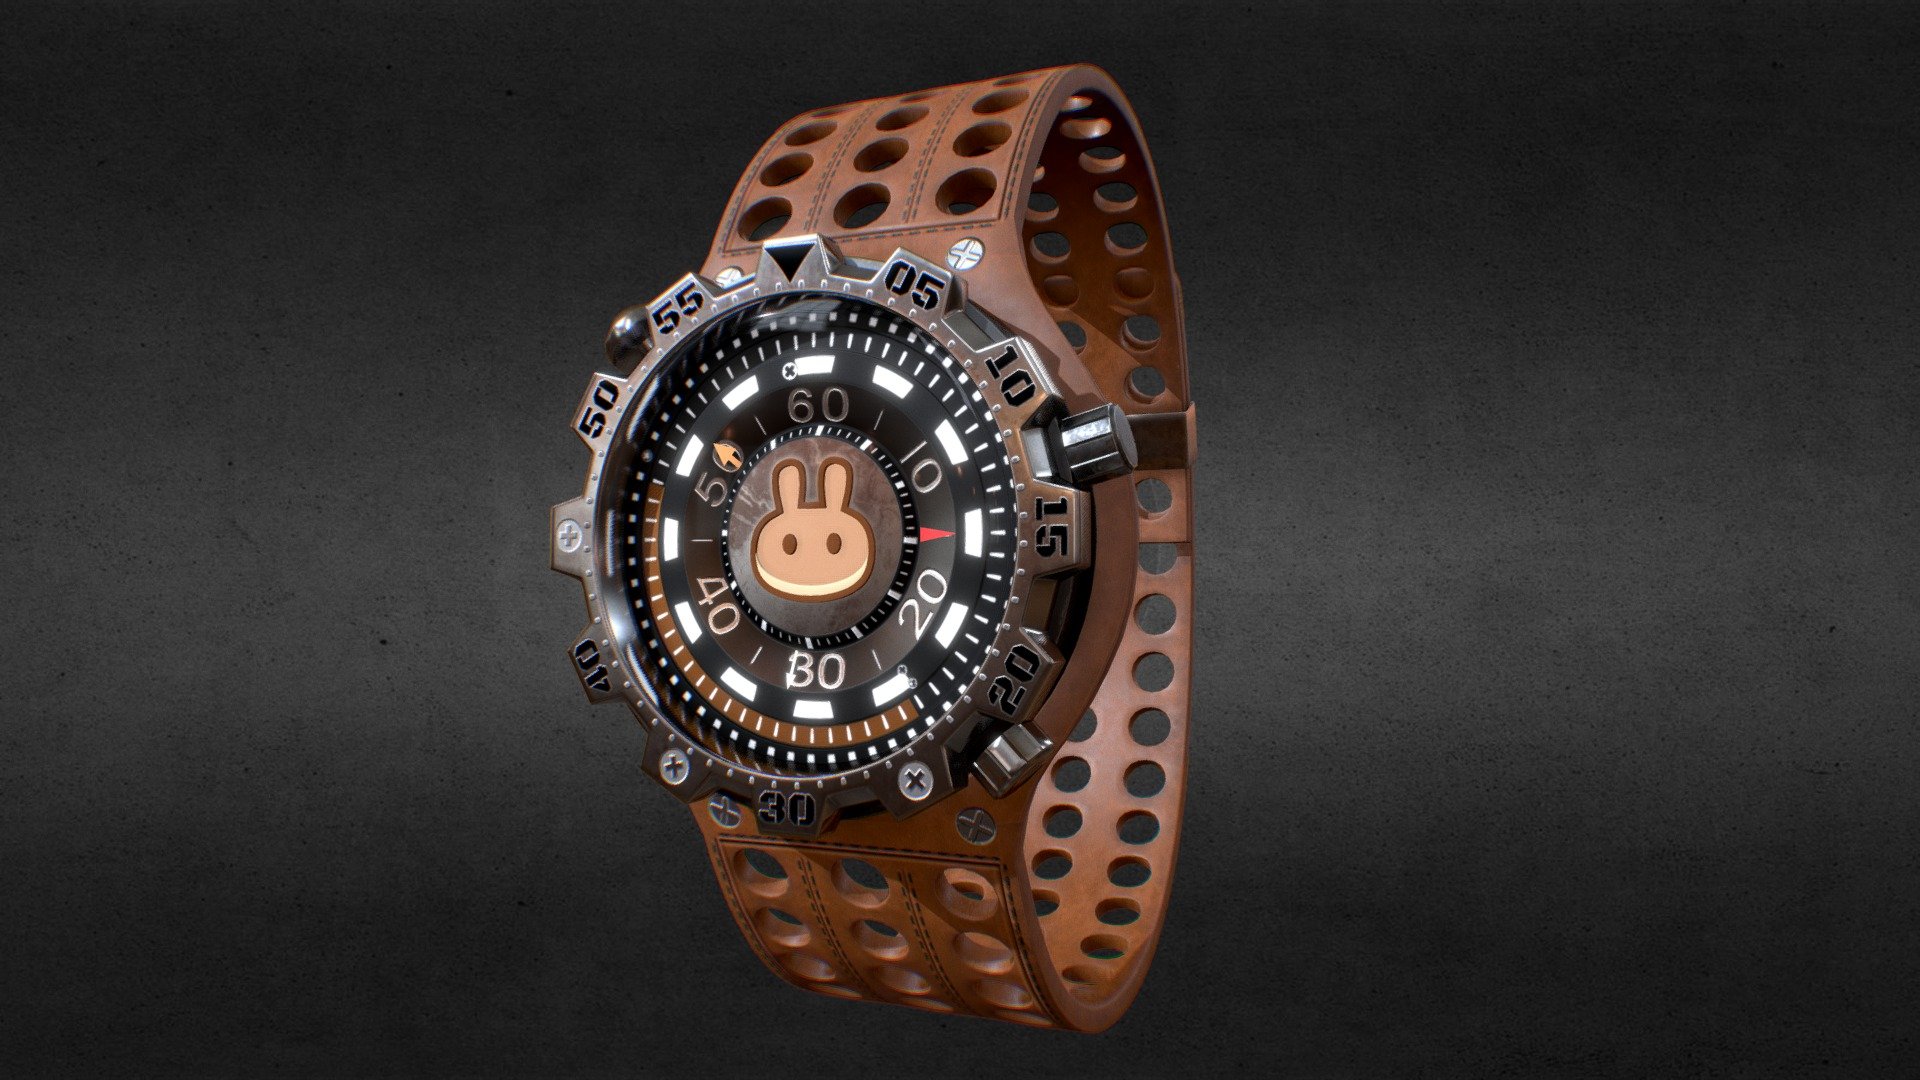 Awesome stainless steelPankake Swap Coin Watch.

Currently available for download in FBX format.

3D model developed by AR-Watches - Pankake Swap Coin Watch - Buy Royalty Free 3D model by ar-watches 3d model